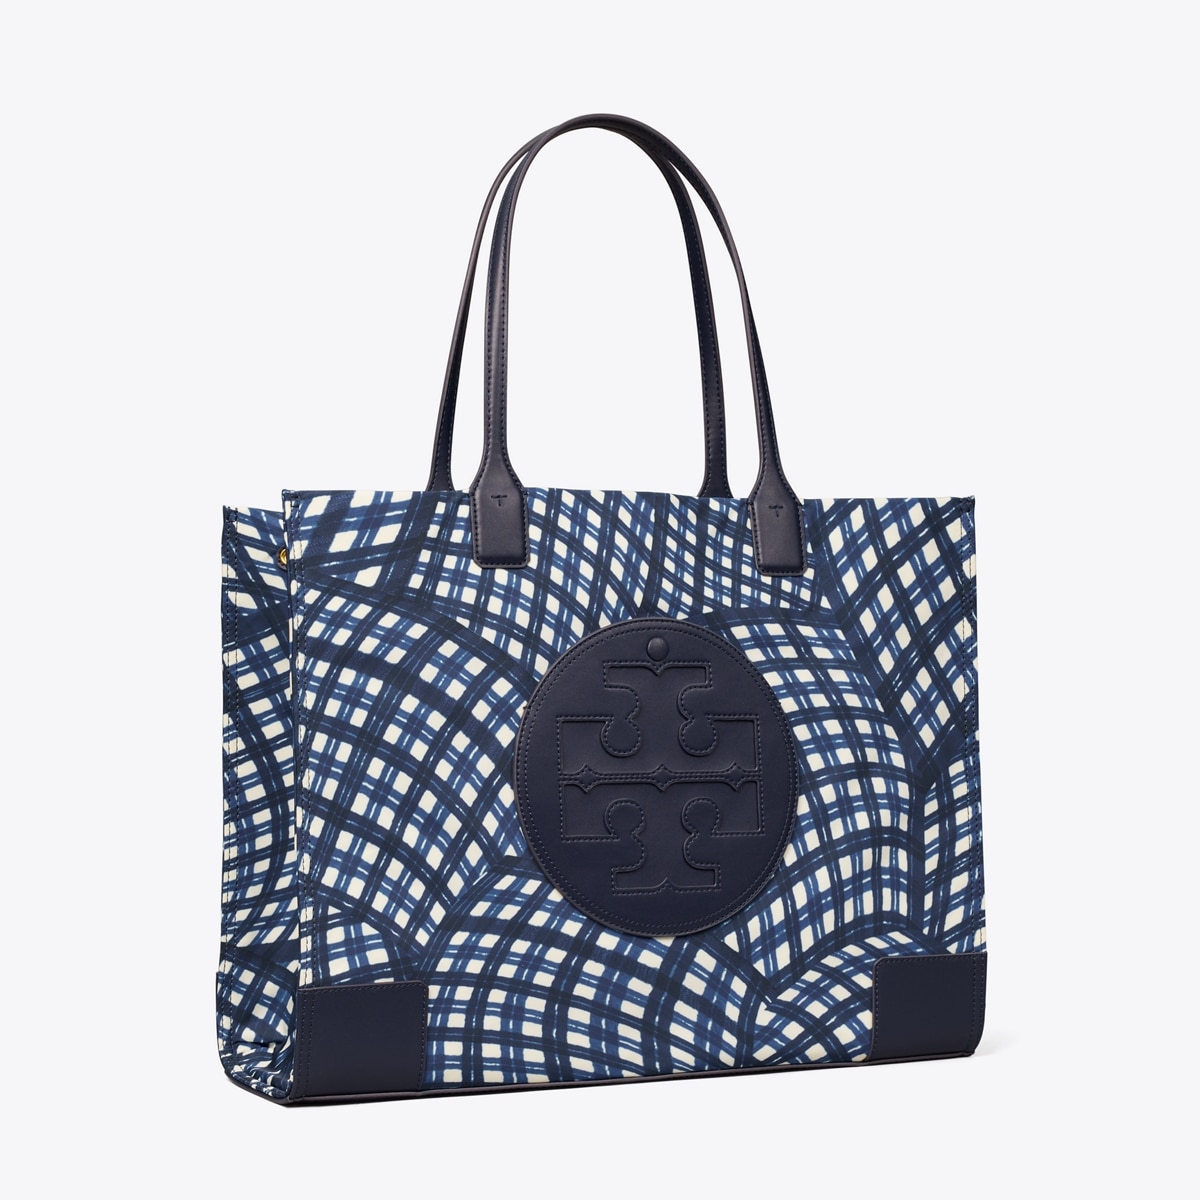 Tory Burch Women's Ella Printed Tote in Navy Warped Gingham, One Size